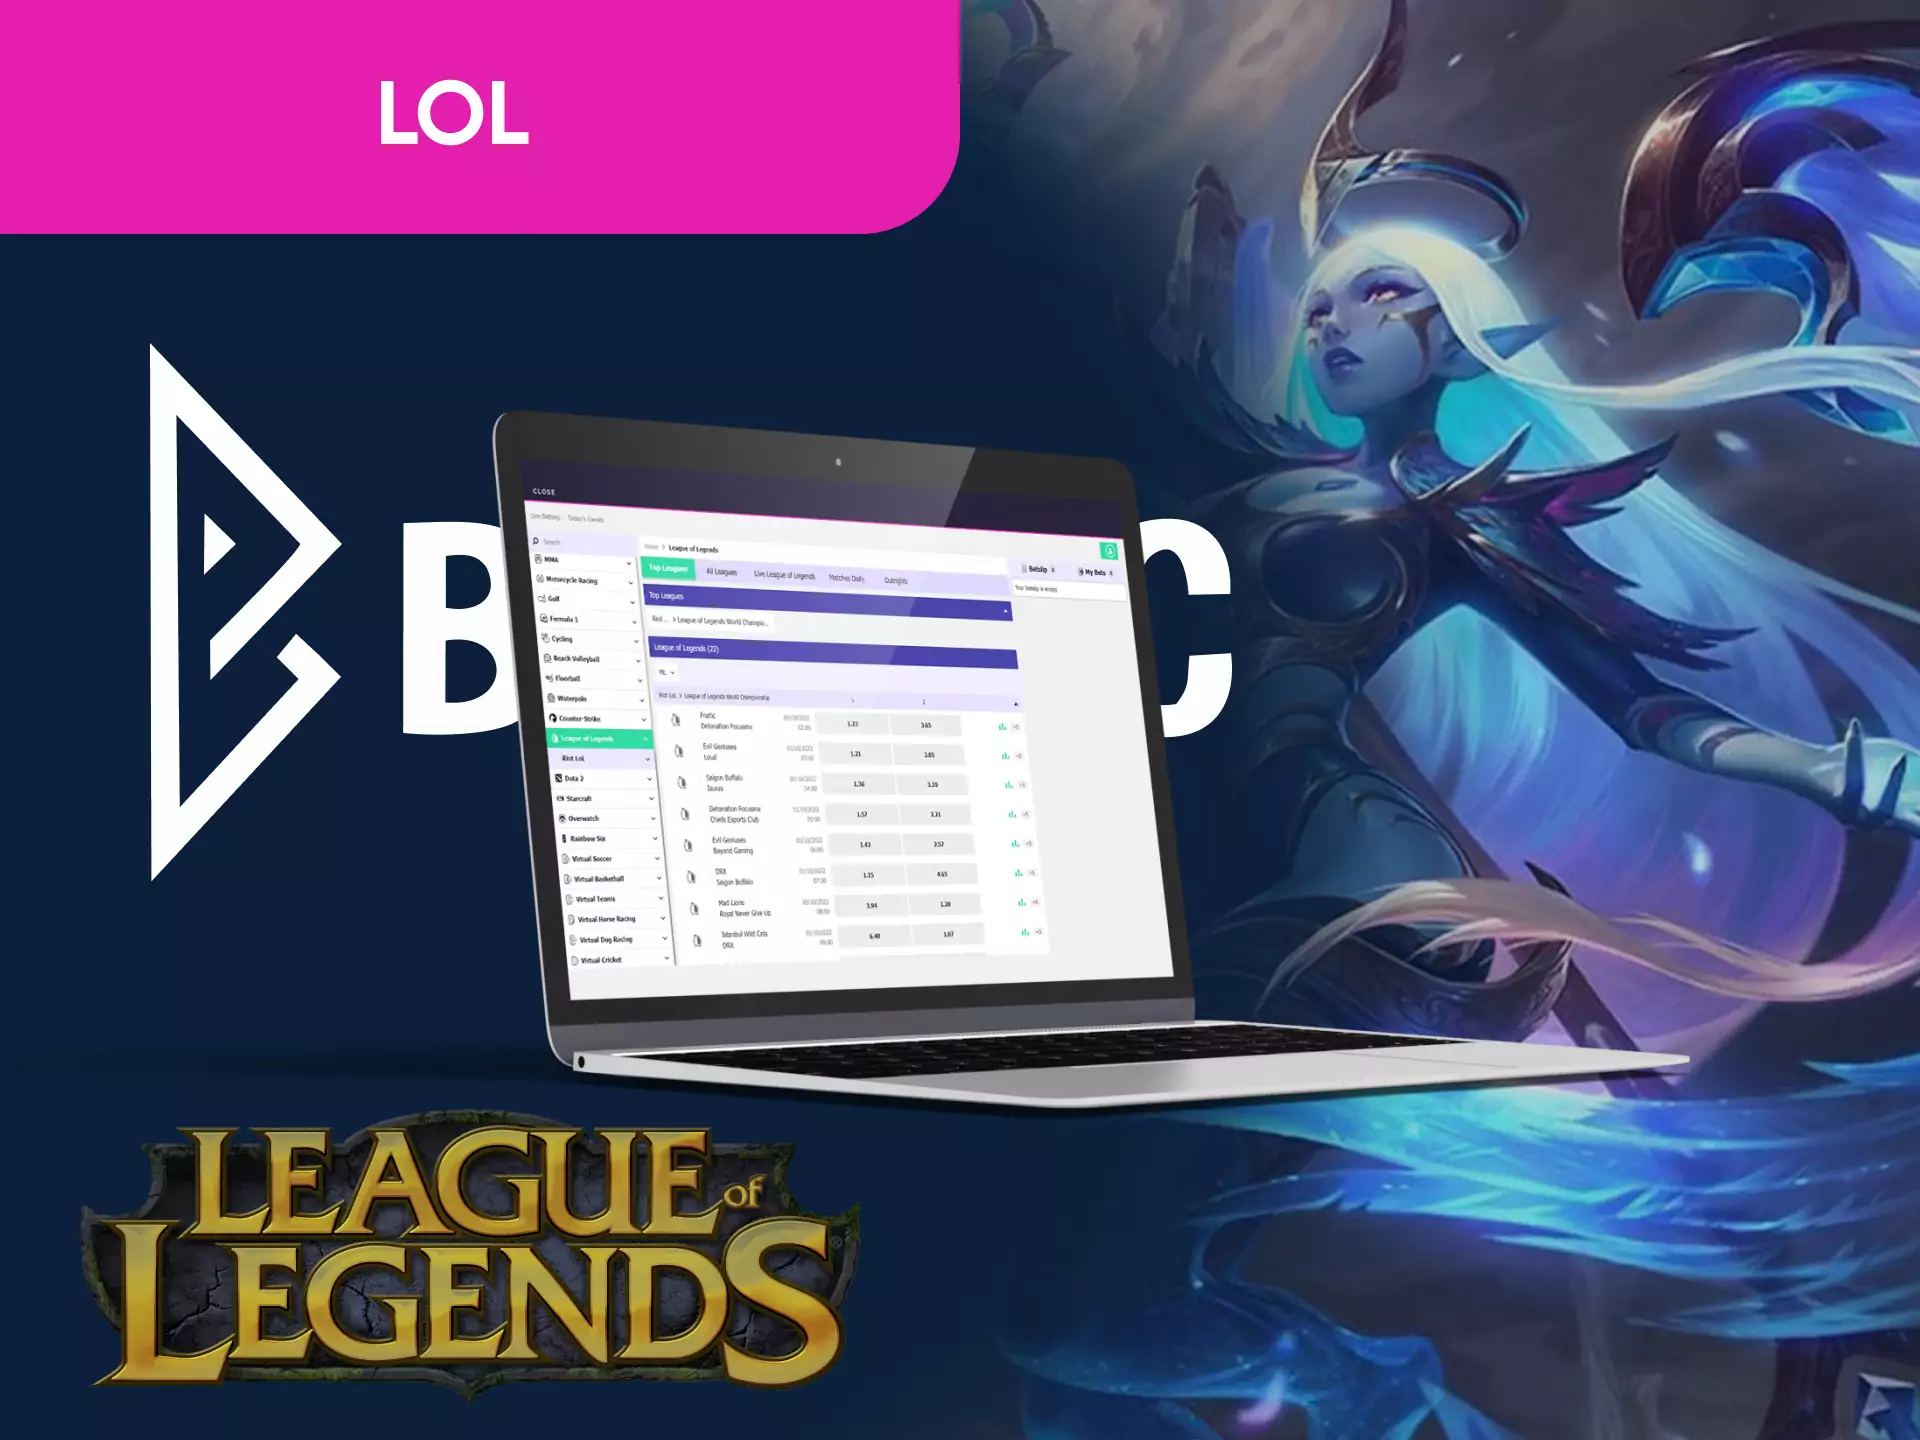 In the Becric sportsbook, you find League of Legends events available for betting.